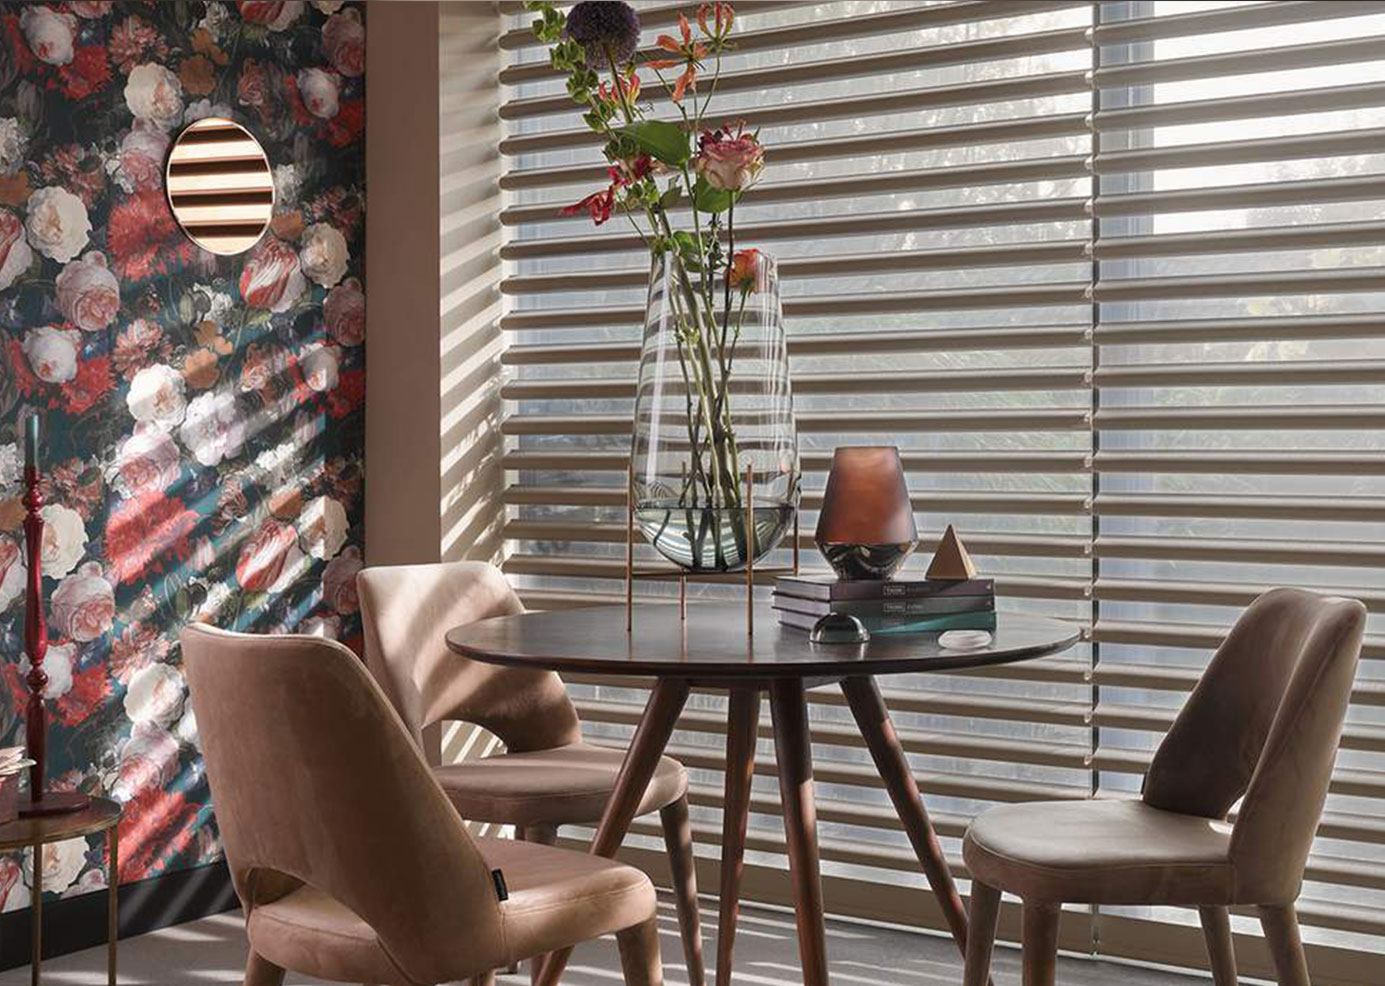 triple shade blinds